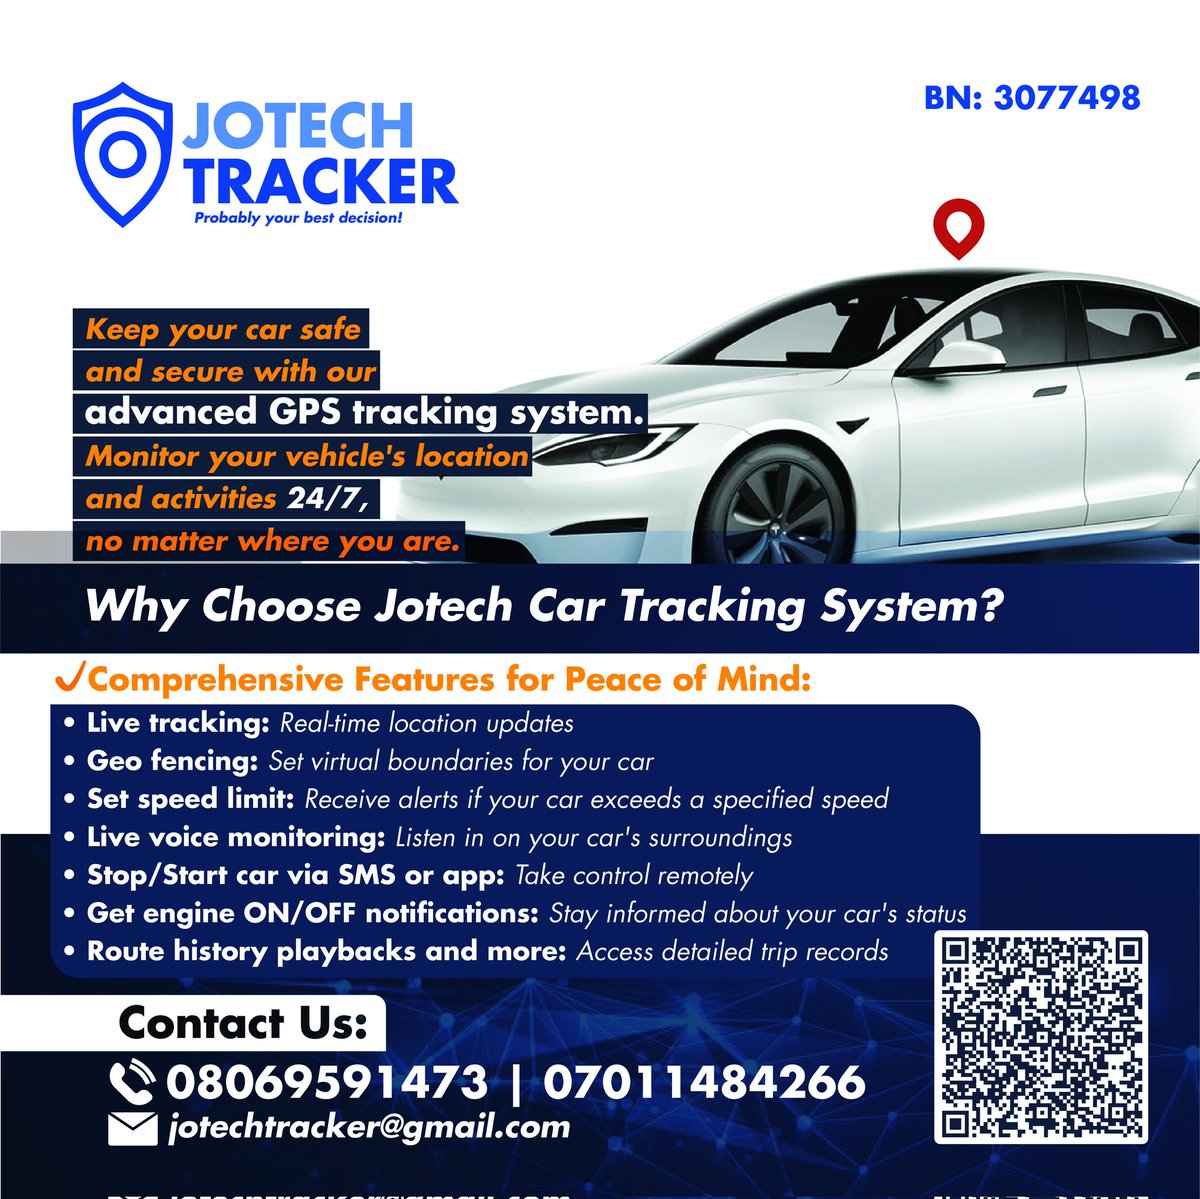 IF UR CAR DOES NOT HAVE A GPS CAR TRACKER INSTALLED ON IT AND IT GETS STOLEN TODAY, THE CHANCES OF FINDING IT IS JUST 10% AND GRACE OF GOD.
☎08069591473

|

Cardi B The CBN Uromi Soso #CynthiaNwadiora #EndHungerProtest Seyi Tinubu BVN and NIN Oronsaye RCCG #CostOfLivingCrisis